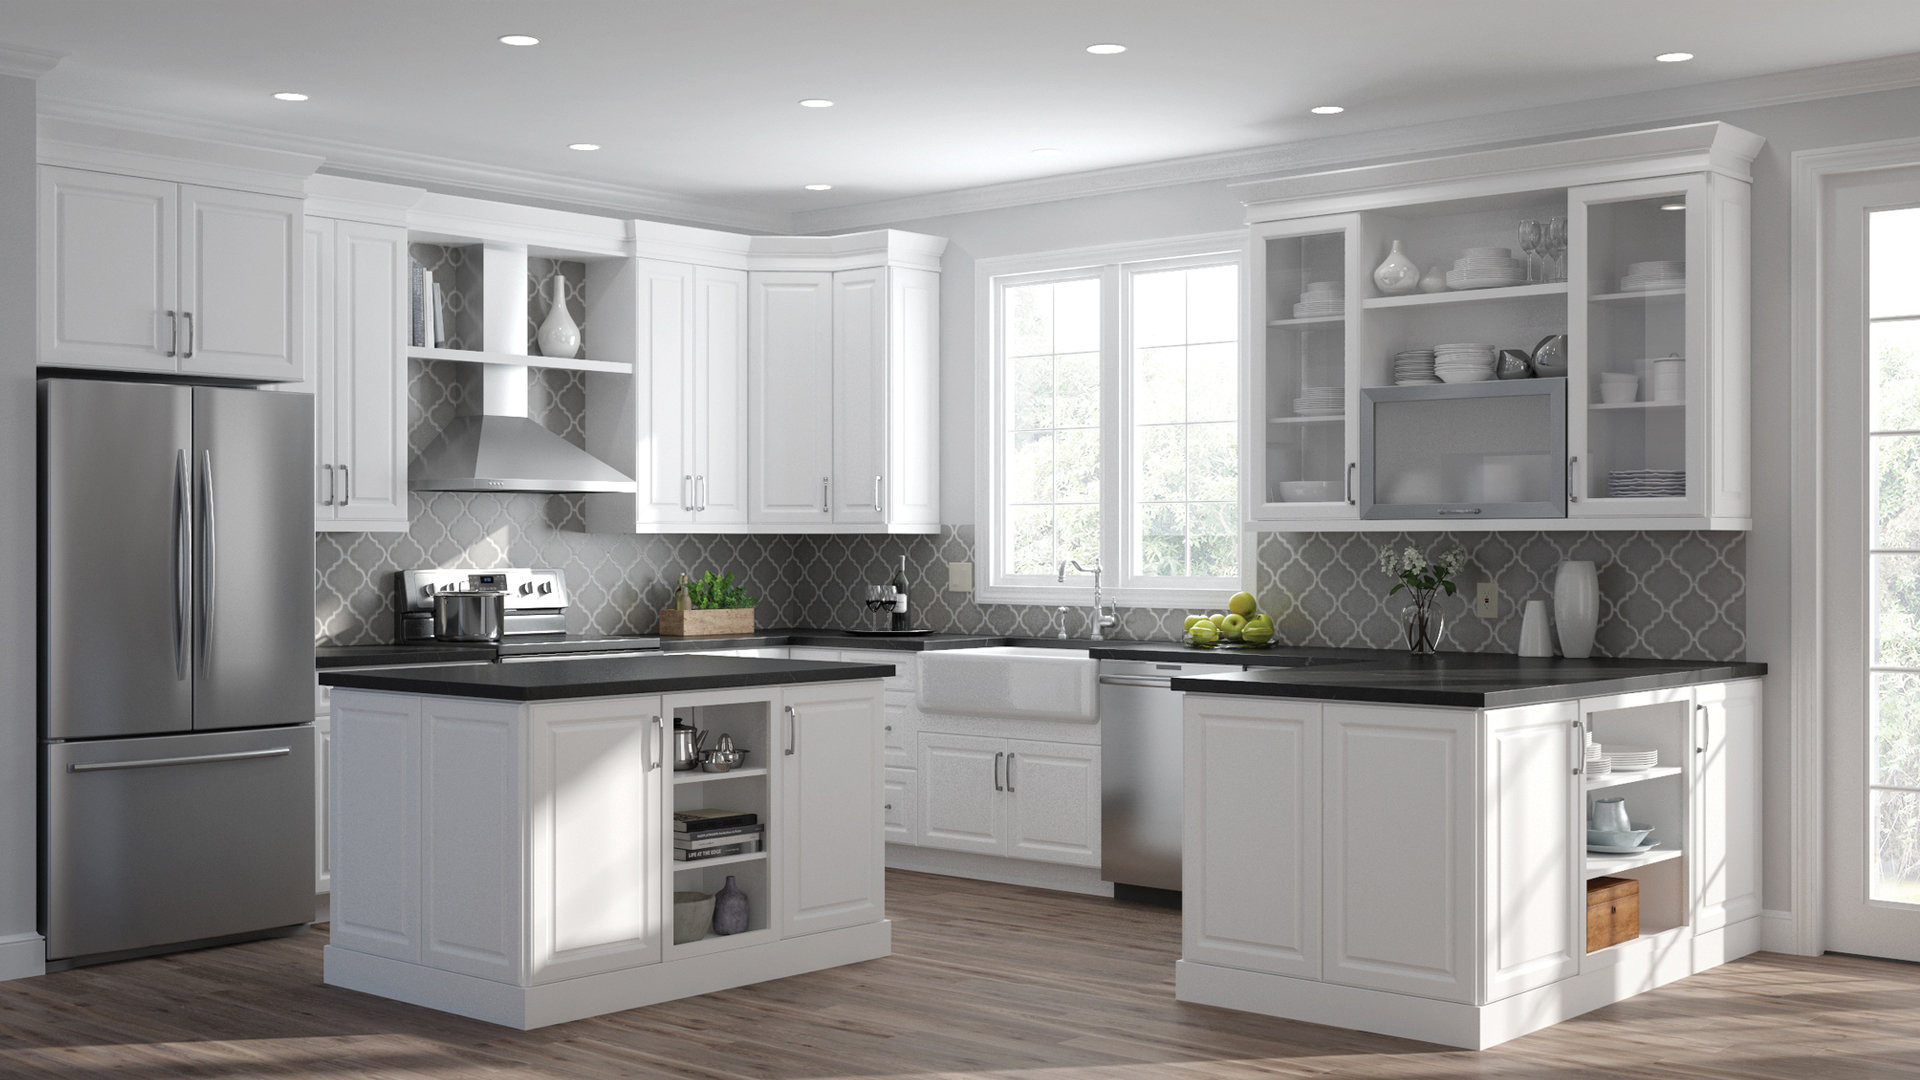 Wall Cabinet Kitchen
 Elgin Wall Cabinets in White – Kitchen – The Home Depot